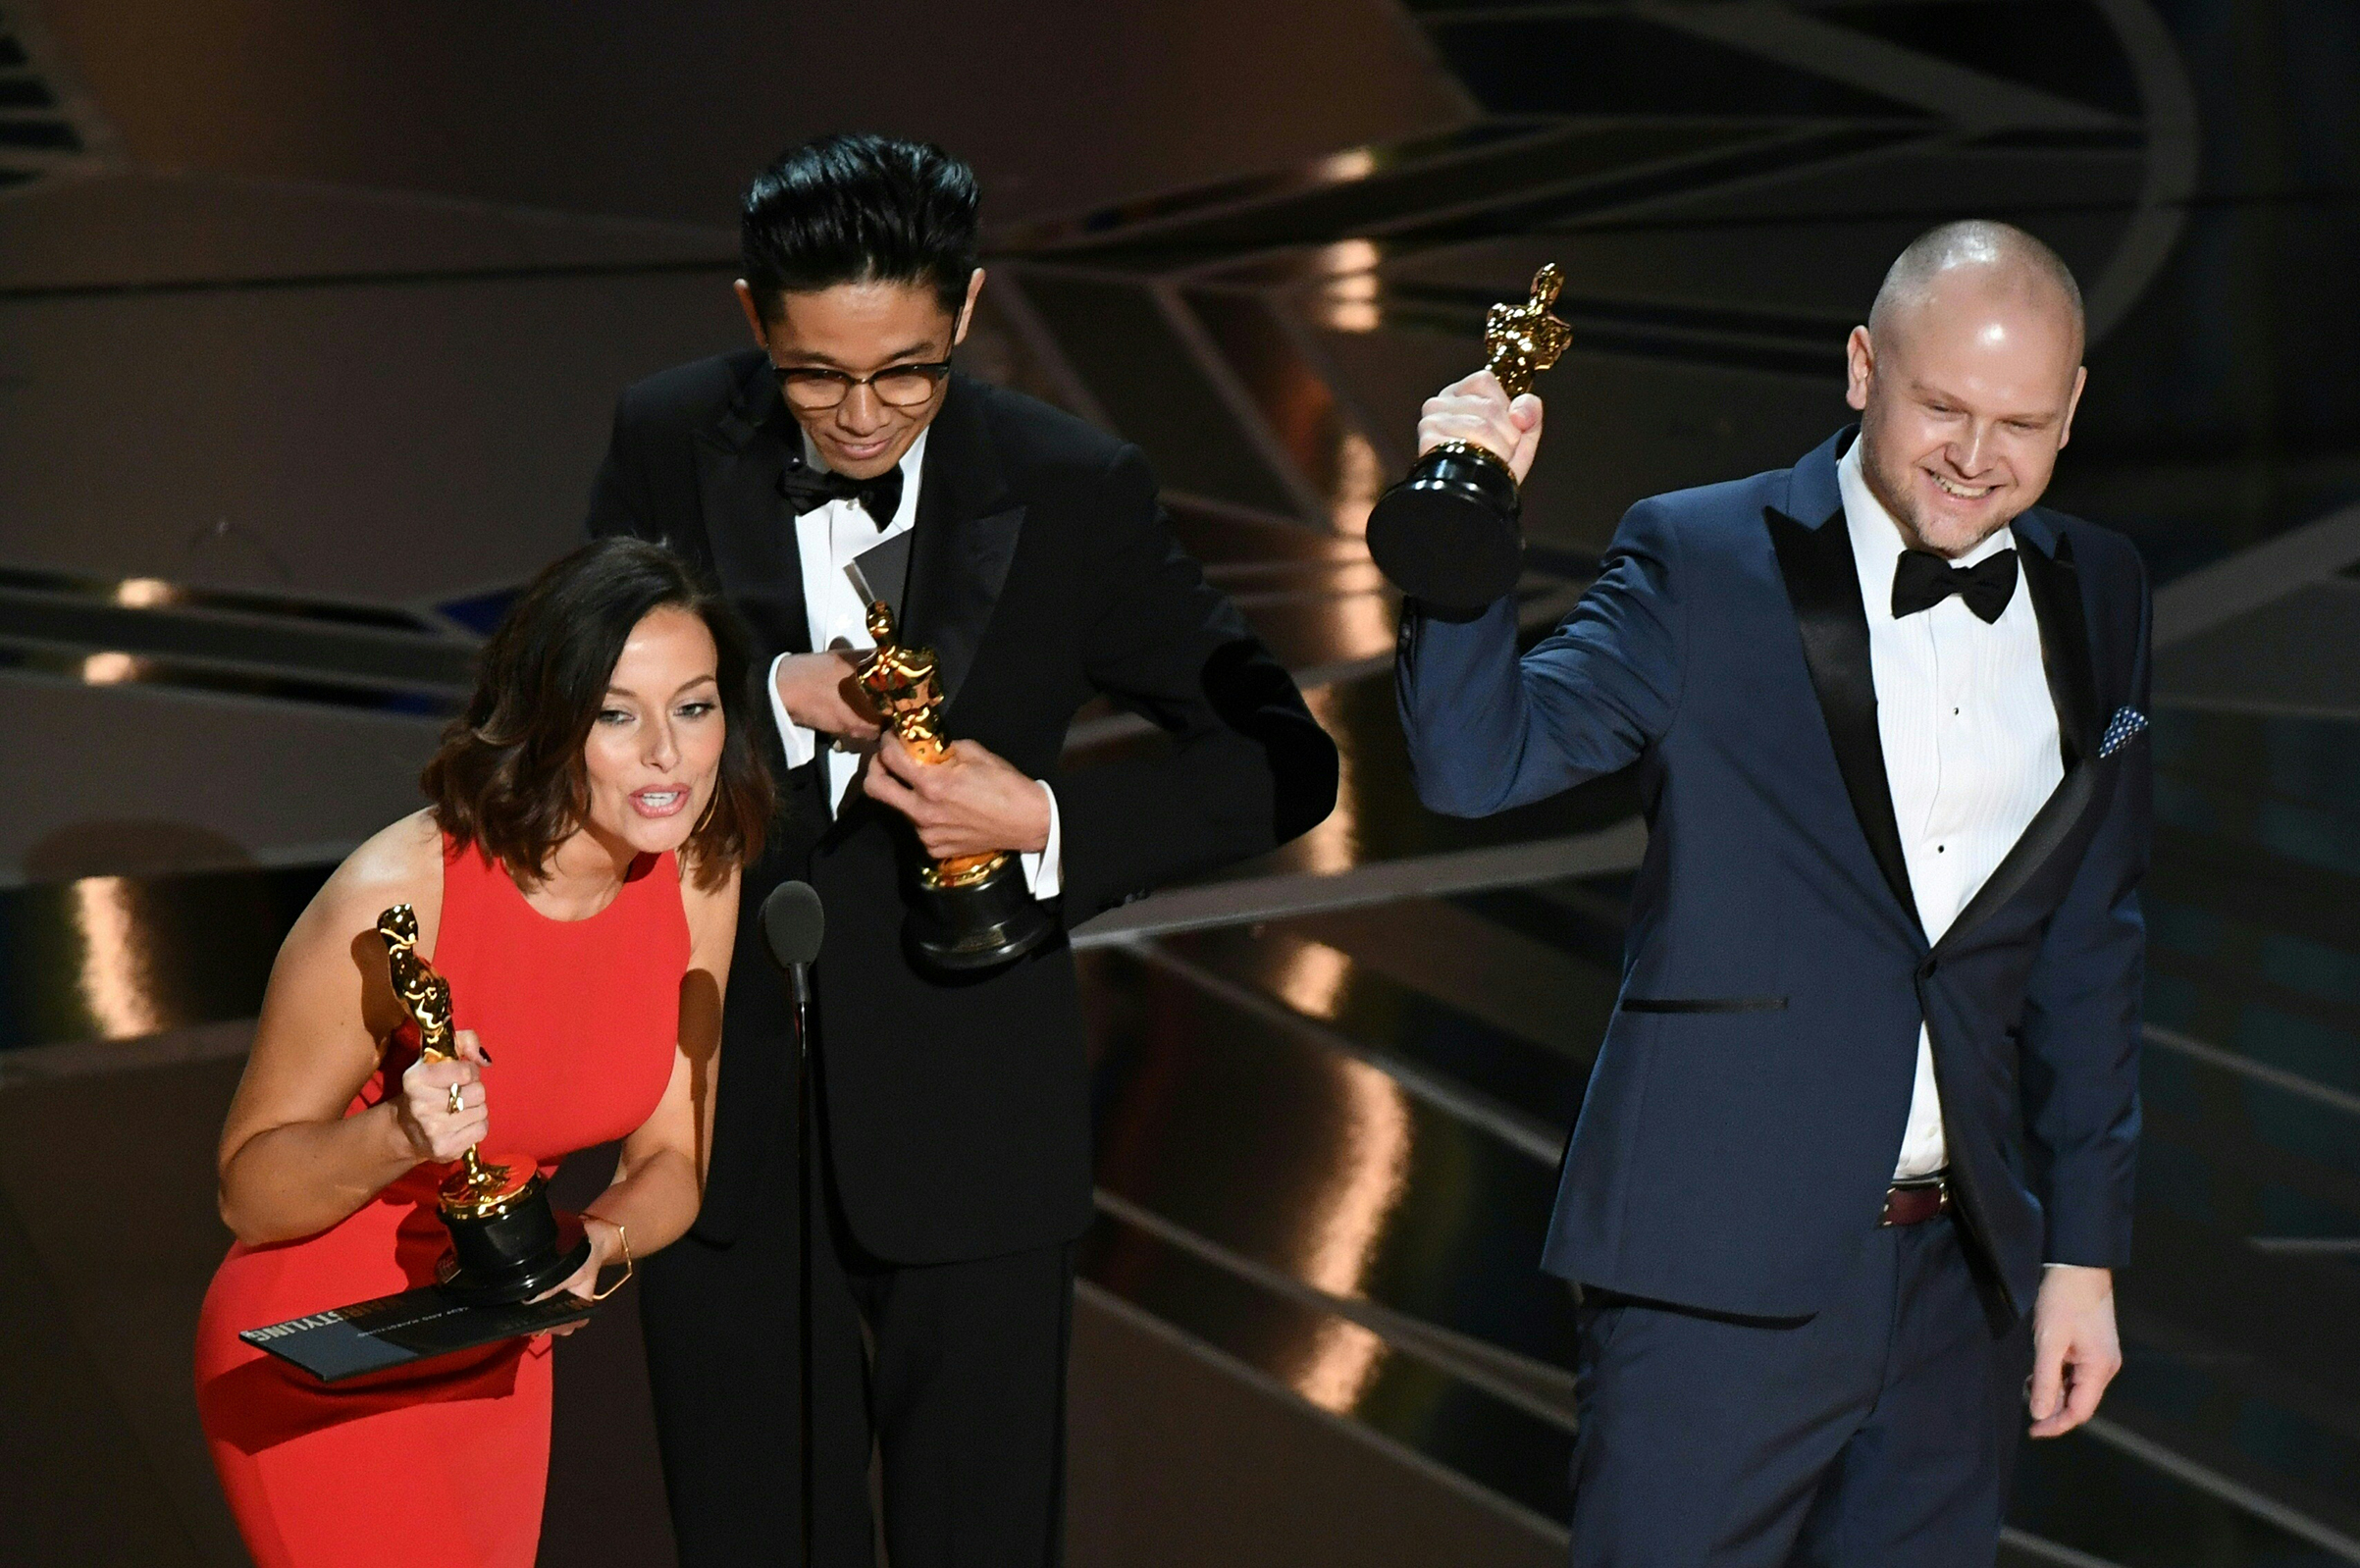 Make-Up and Hairstyling artists Lucy Sibbick, Kazuhiro Tsuji and David Malinowski accept the Oscar for Best Makeup and Hairstyling in Darkest Hour during the 90th Annual Academy Awards show on March 4, 2018 in Hollywood. (Mark Ralston—AFP/Getty Images)